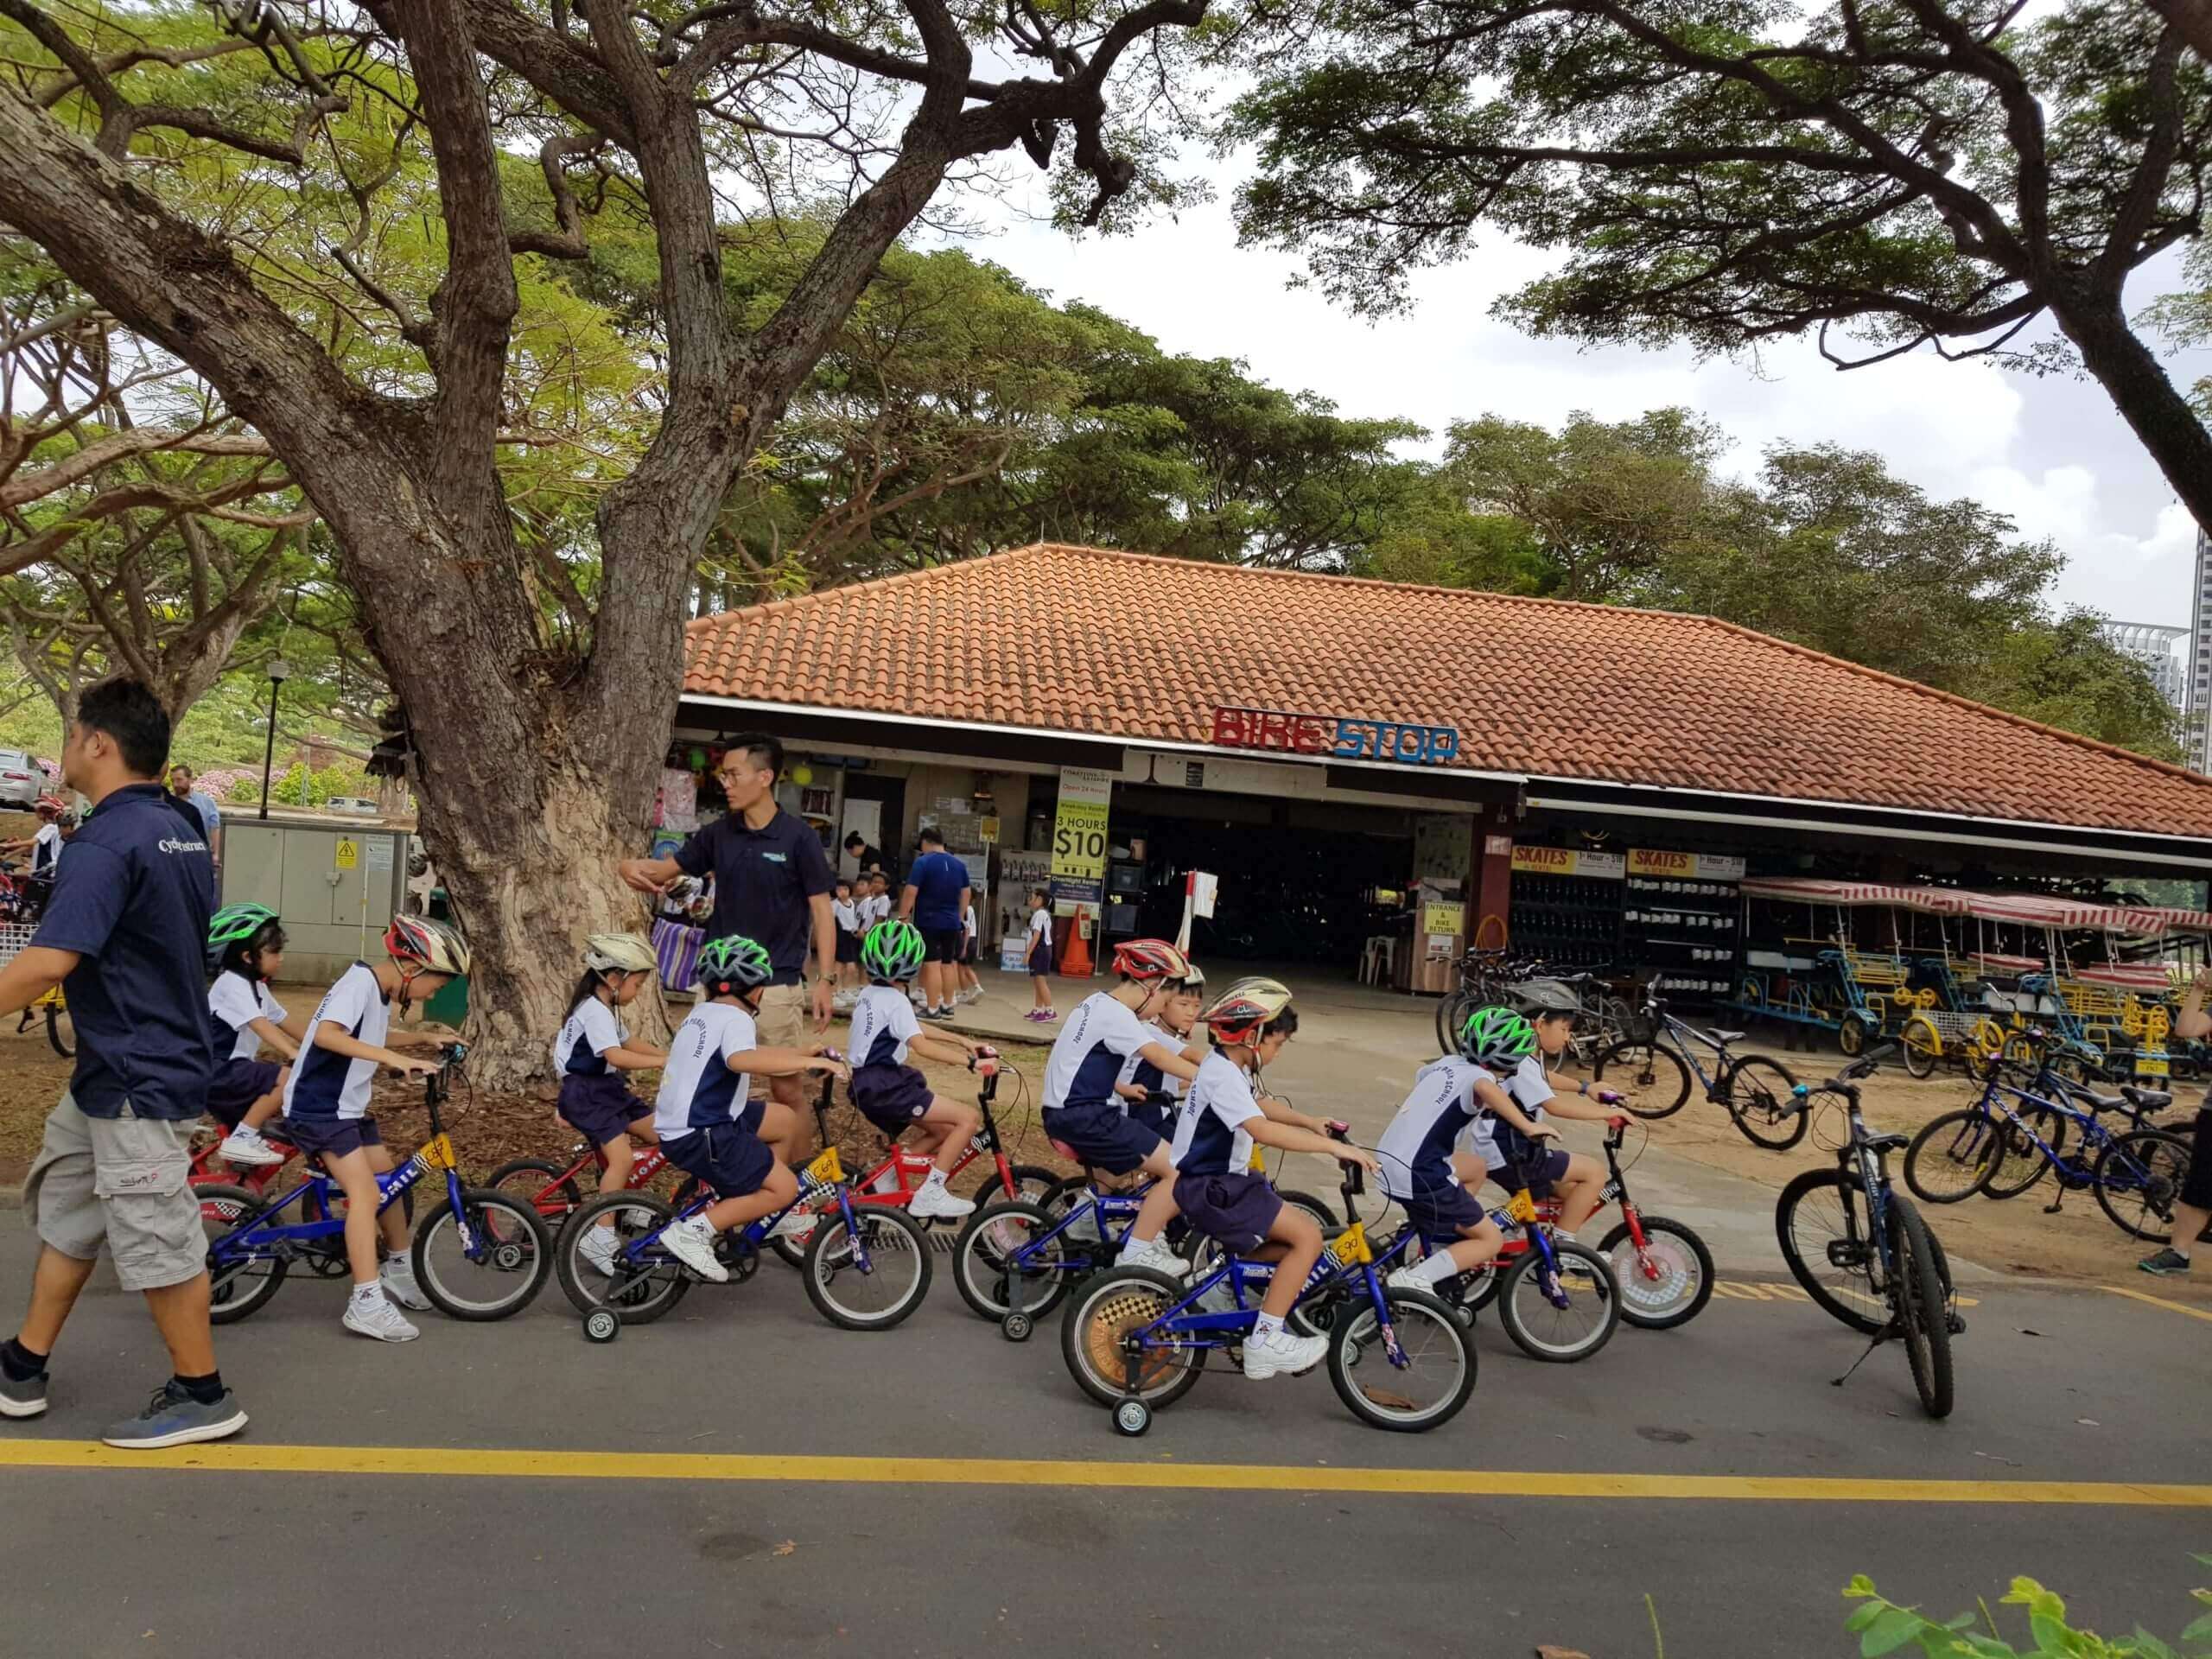 A group of school children riding a bike with guidance from adult trainer